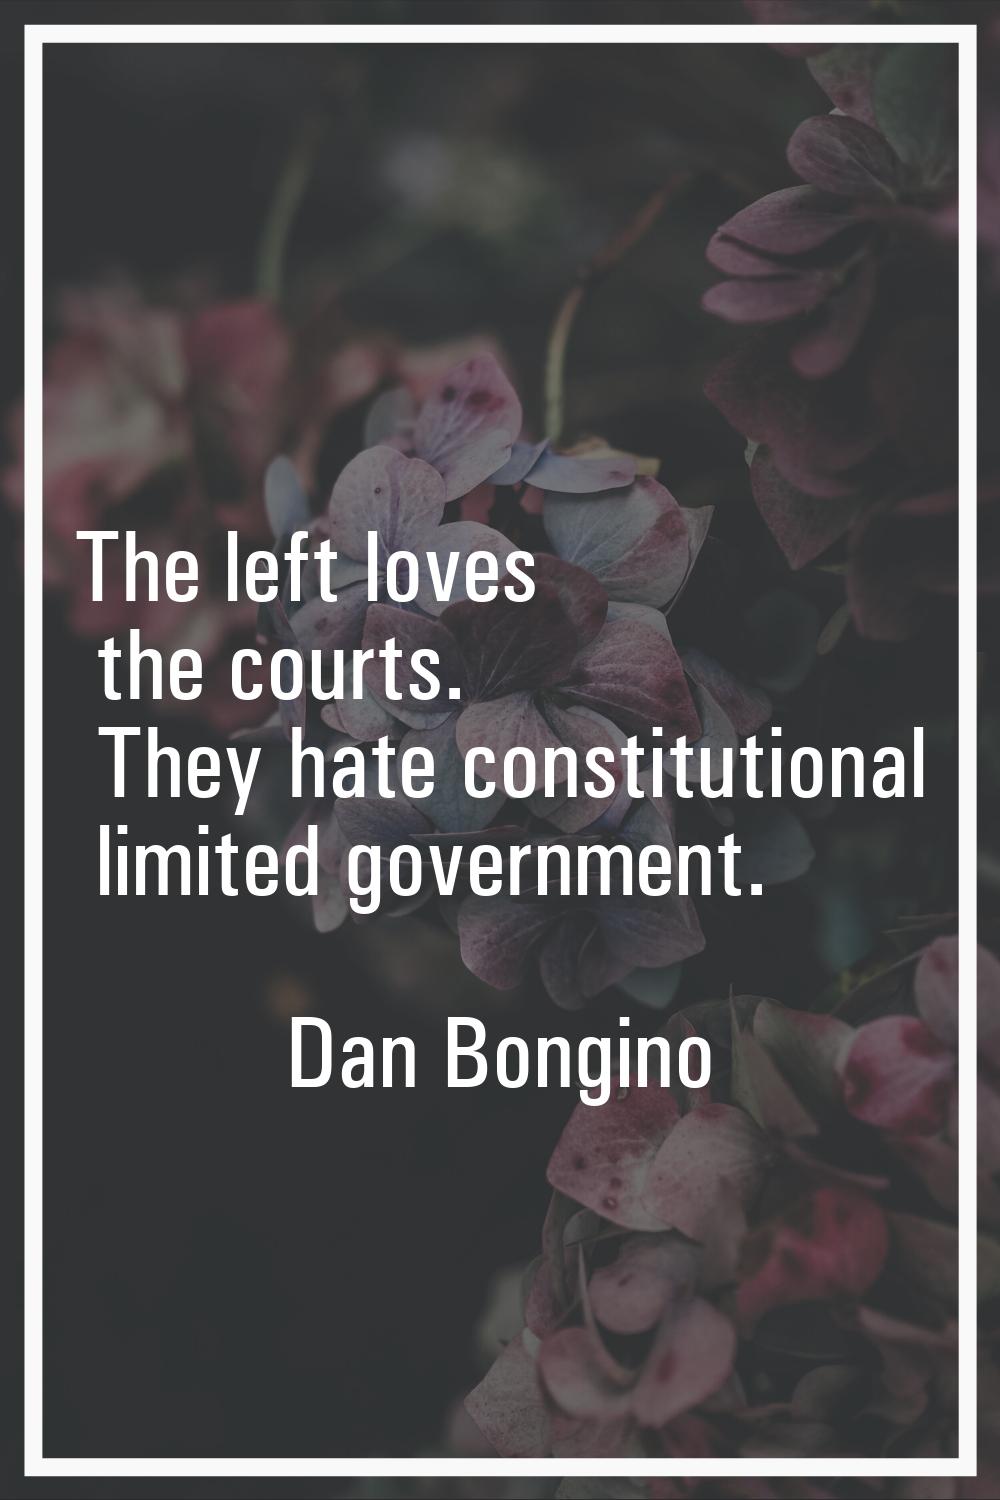 The left loves the courts. They hate constitutional limited government.